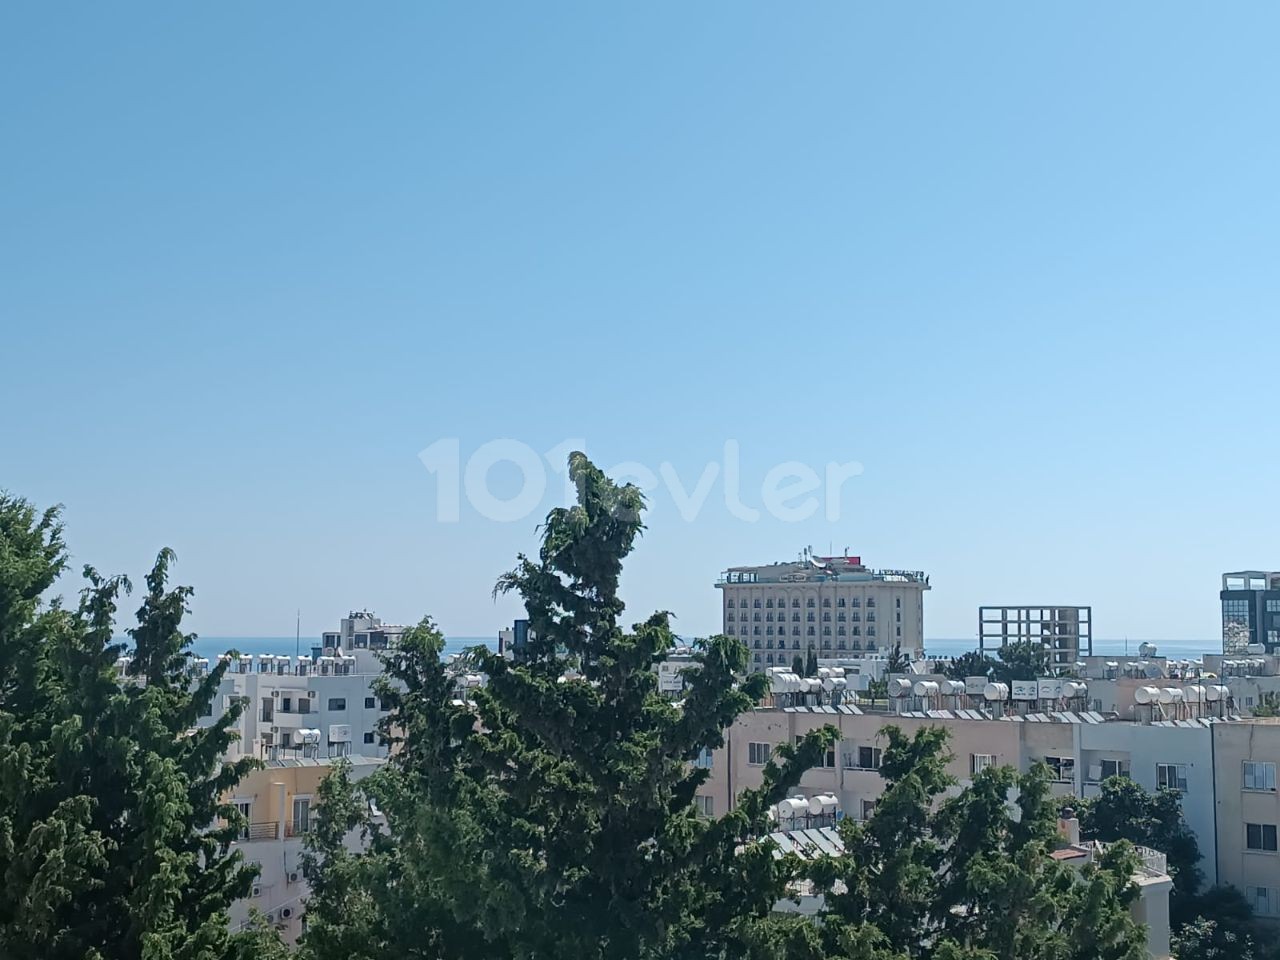 UPDATE!! 2+1 ZERO PENTHOUSE APARTMENT IN THE CENTER OF KYRENIA IS WORTH VISITING WITH ITS SPECIAL DESIGN FIREPLACE..